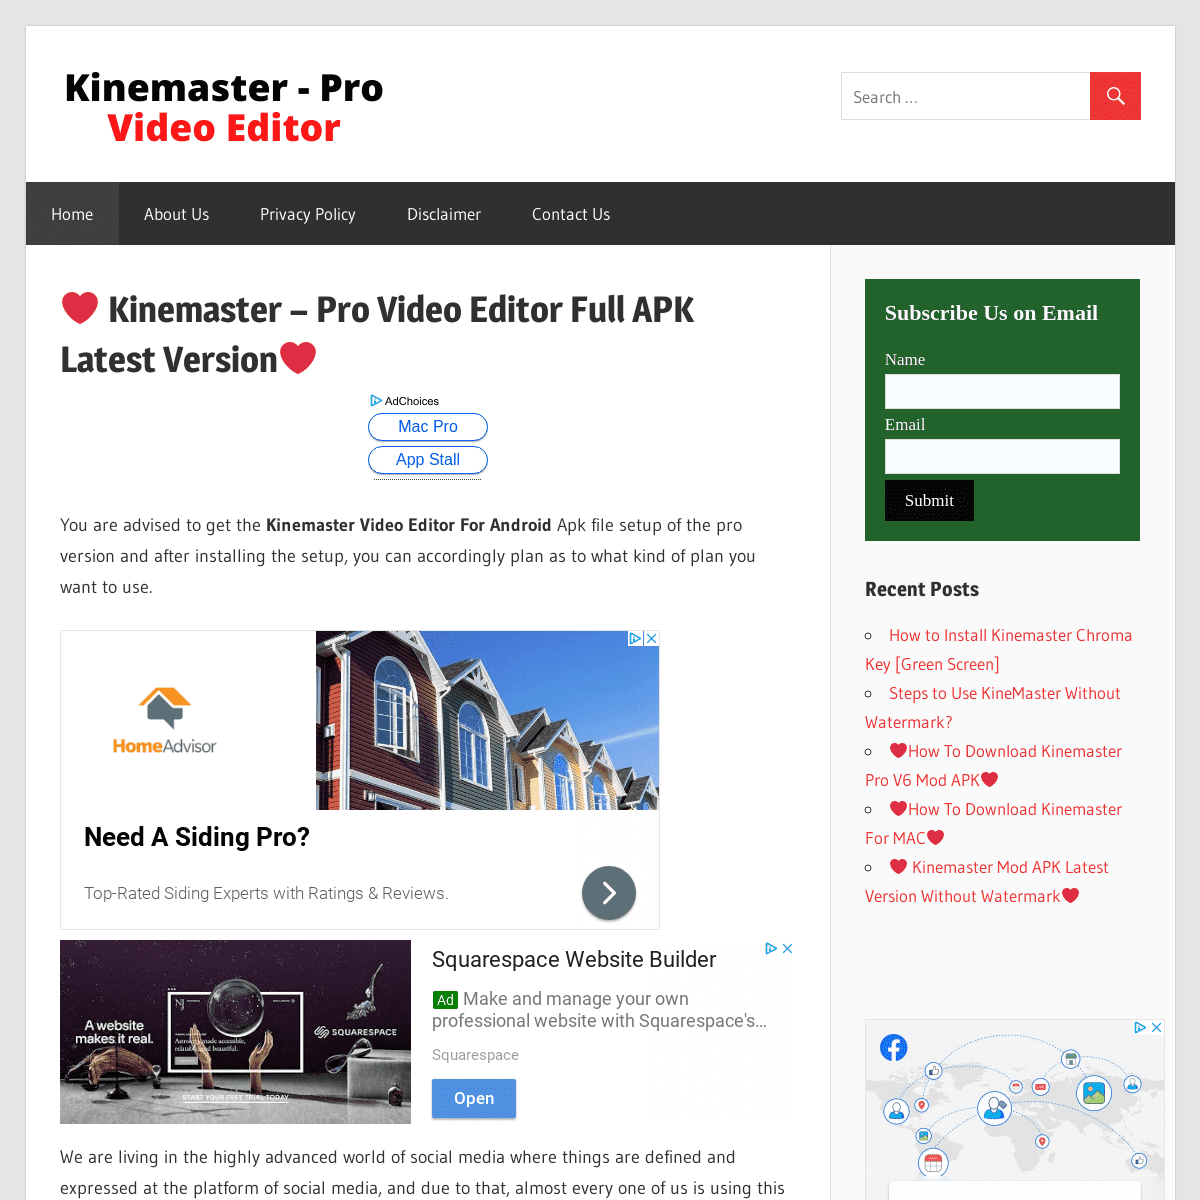 A complete backup of kinemaster.info